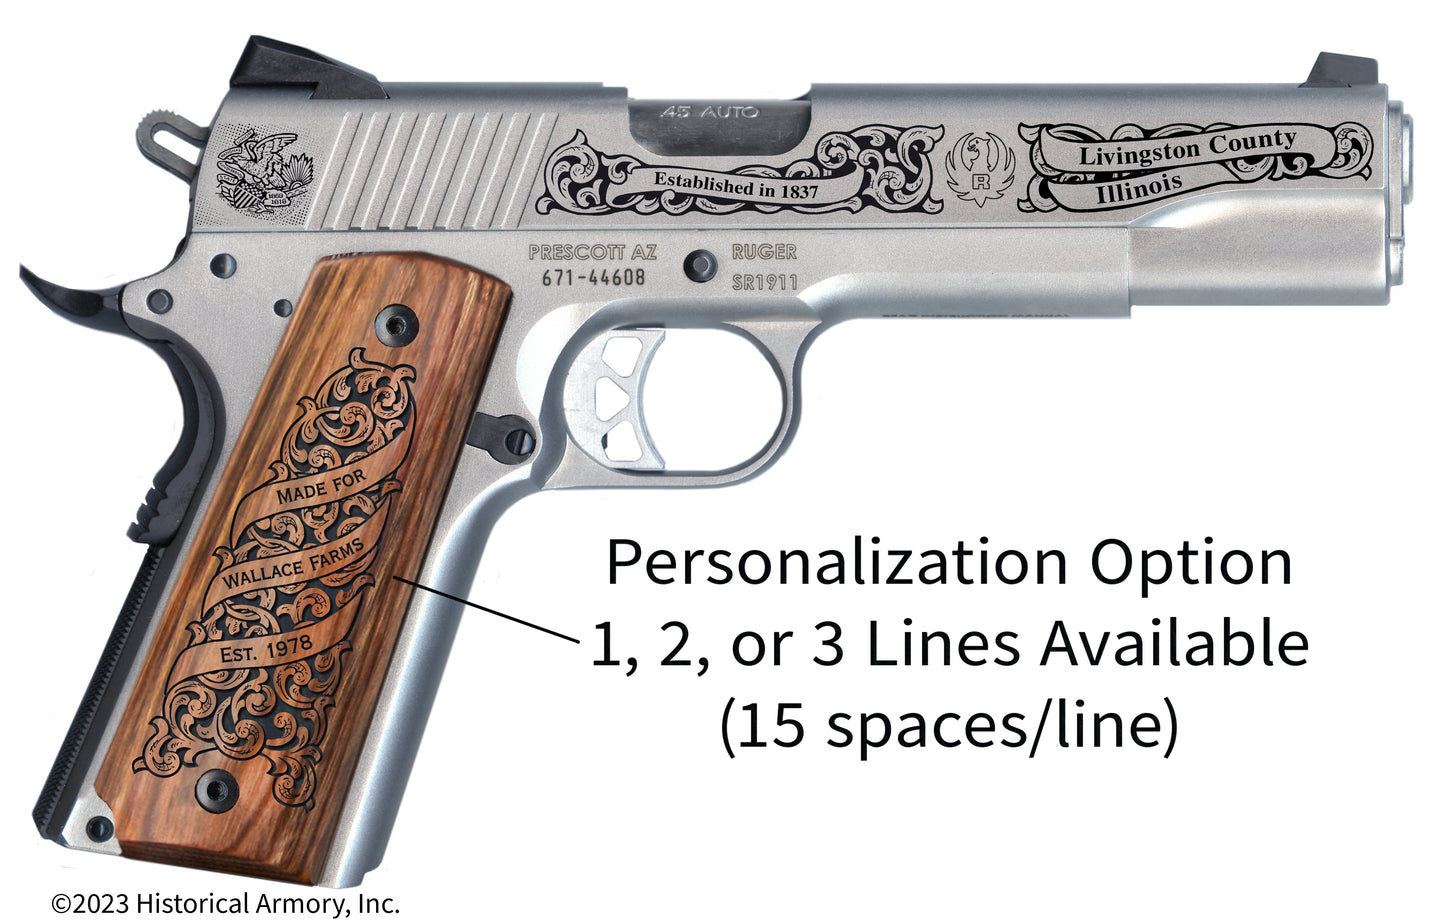 Livingston County Illinois Personalized Engraved .45 Auto Ruger 1911